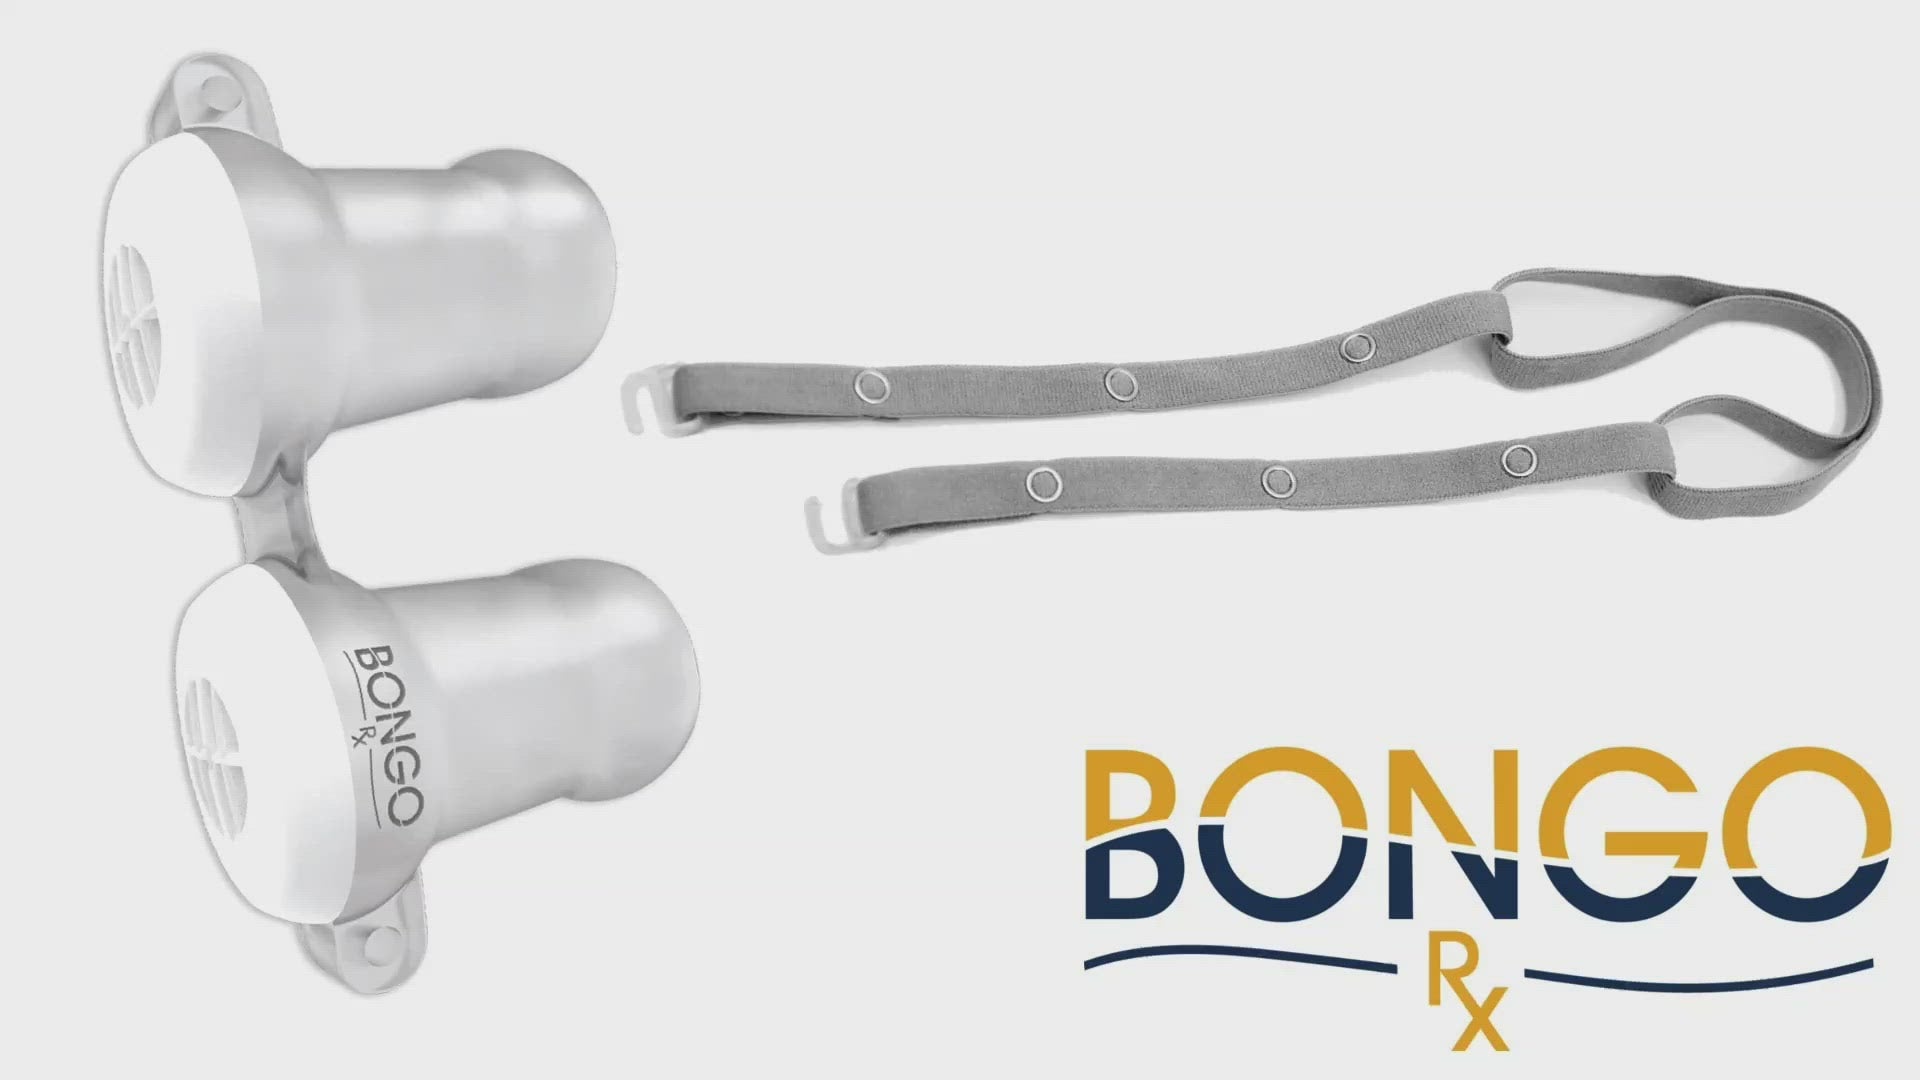 Using Optional / Replacement Headgear Accessory Bongo Rx